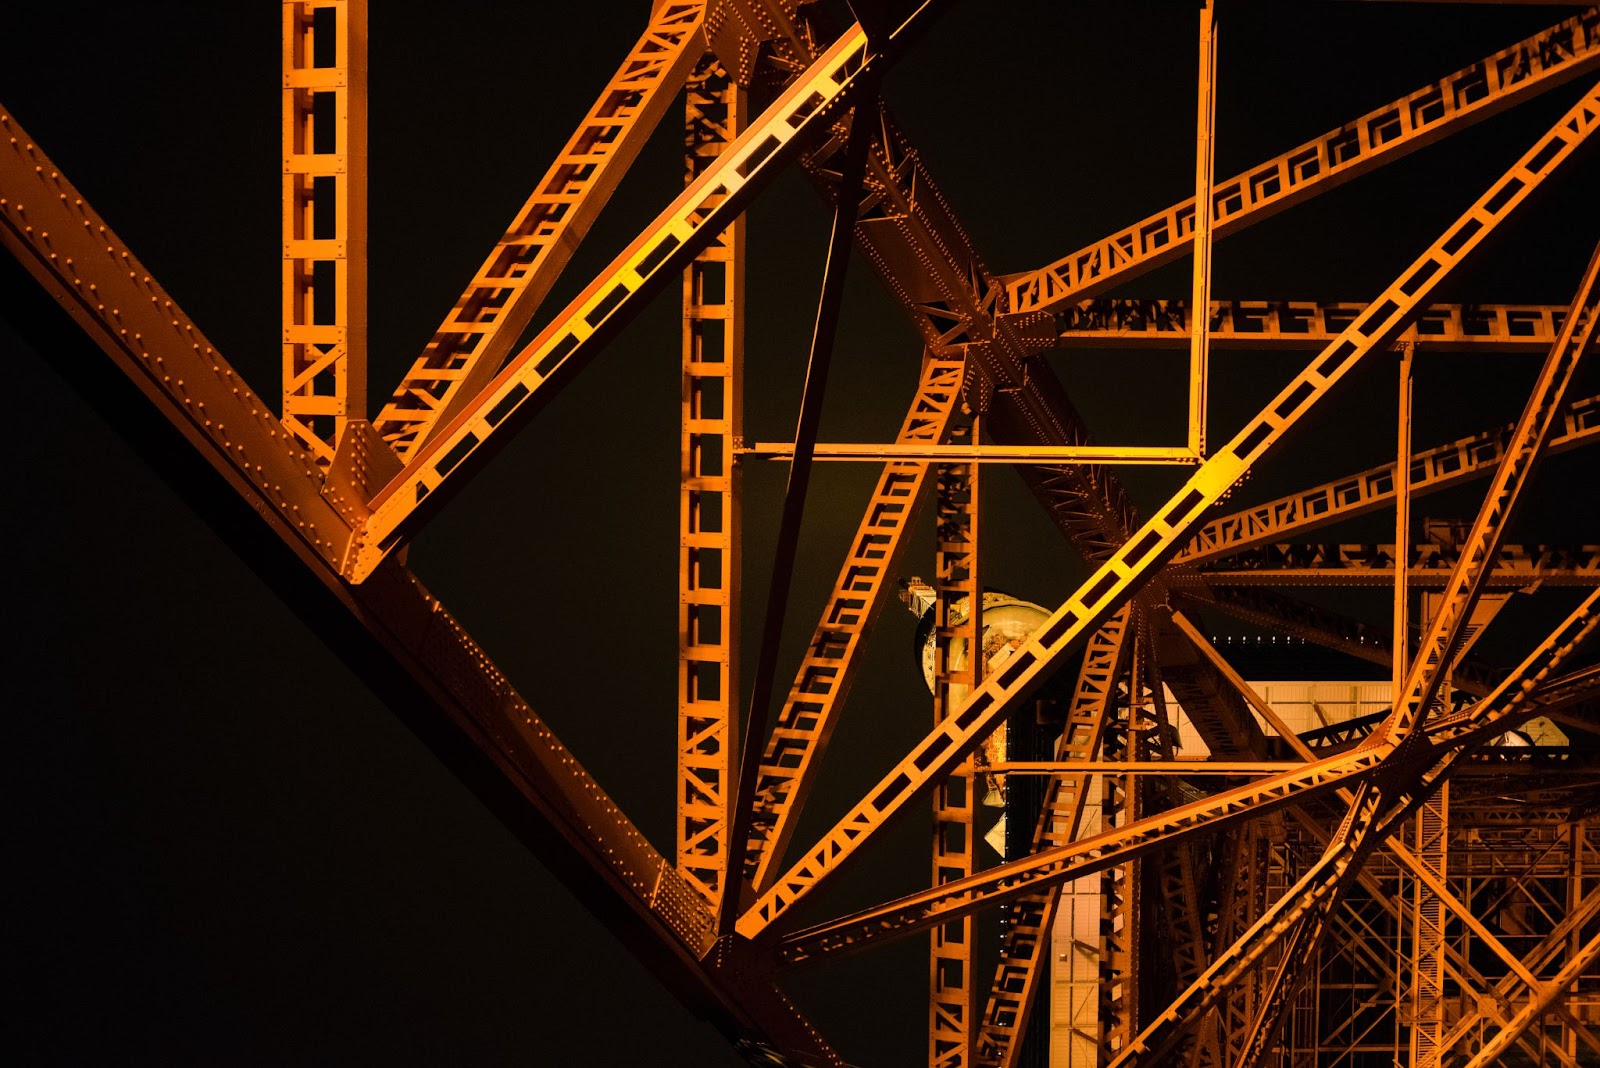 Image of a large metal structure with a black background